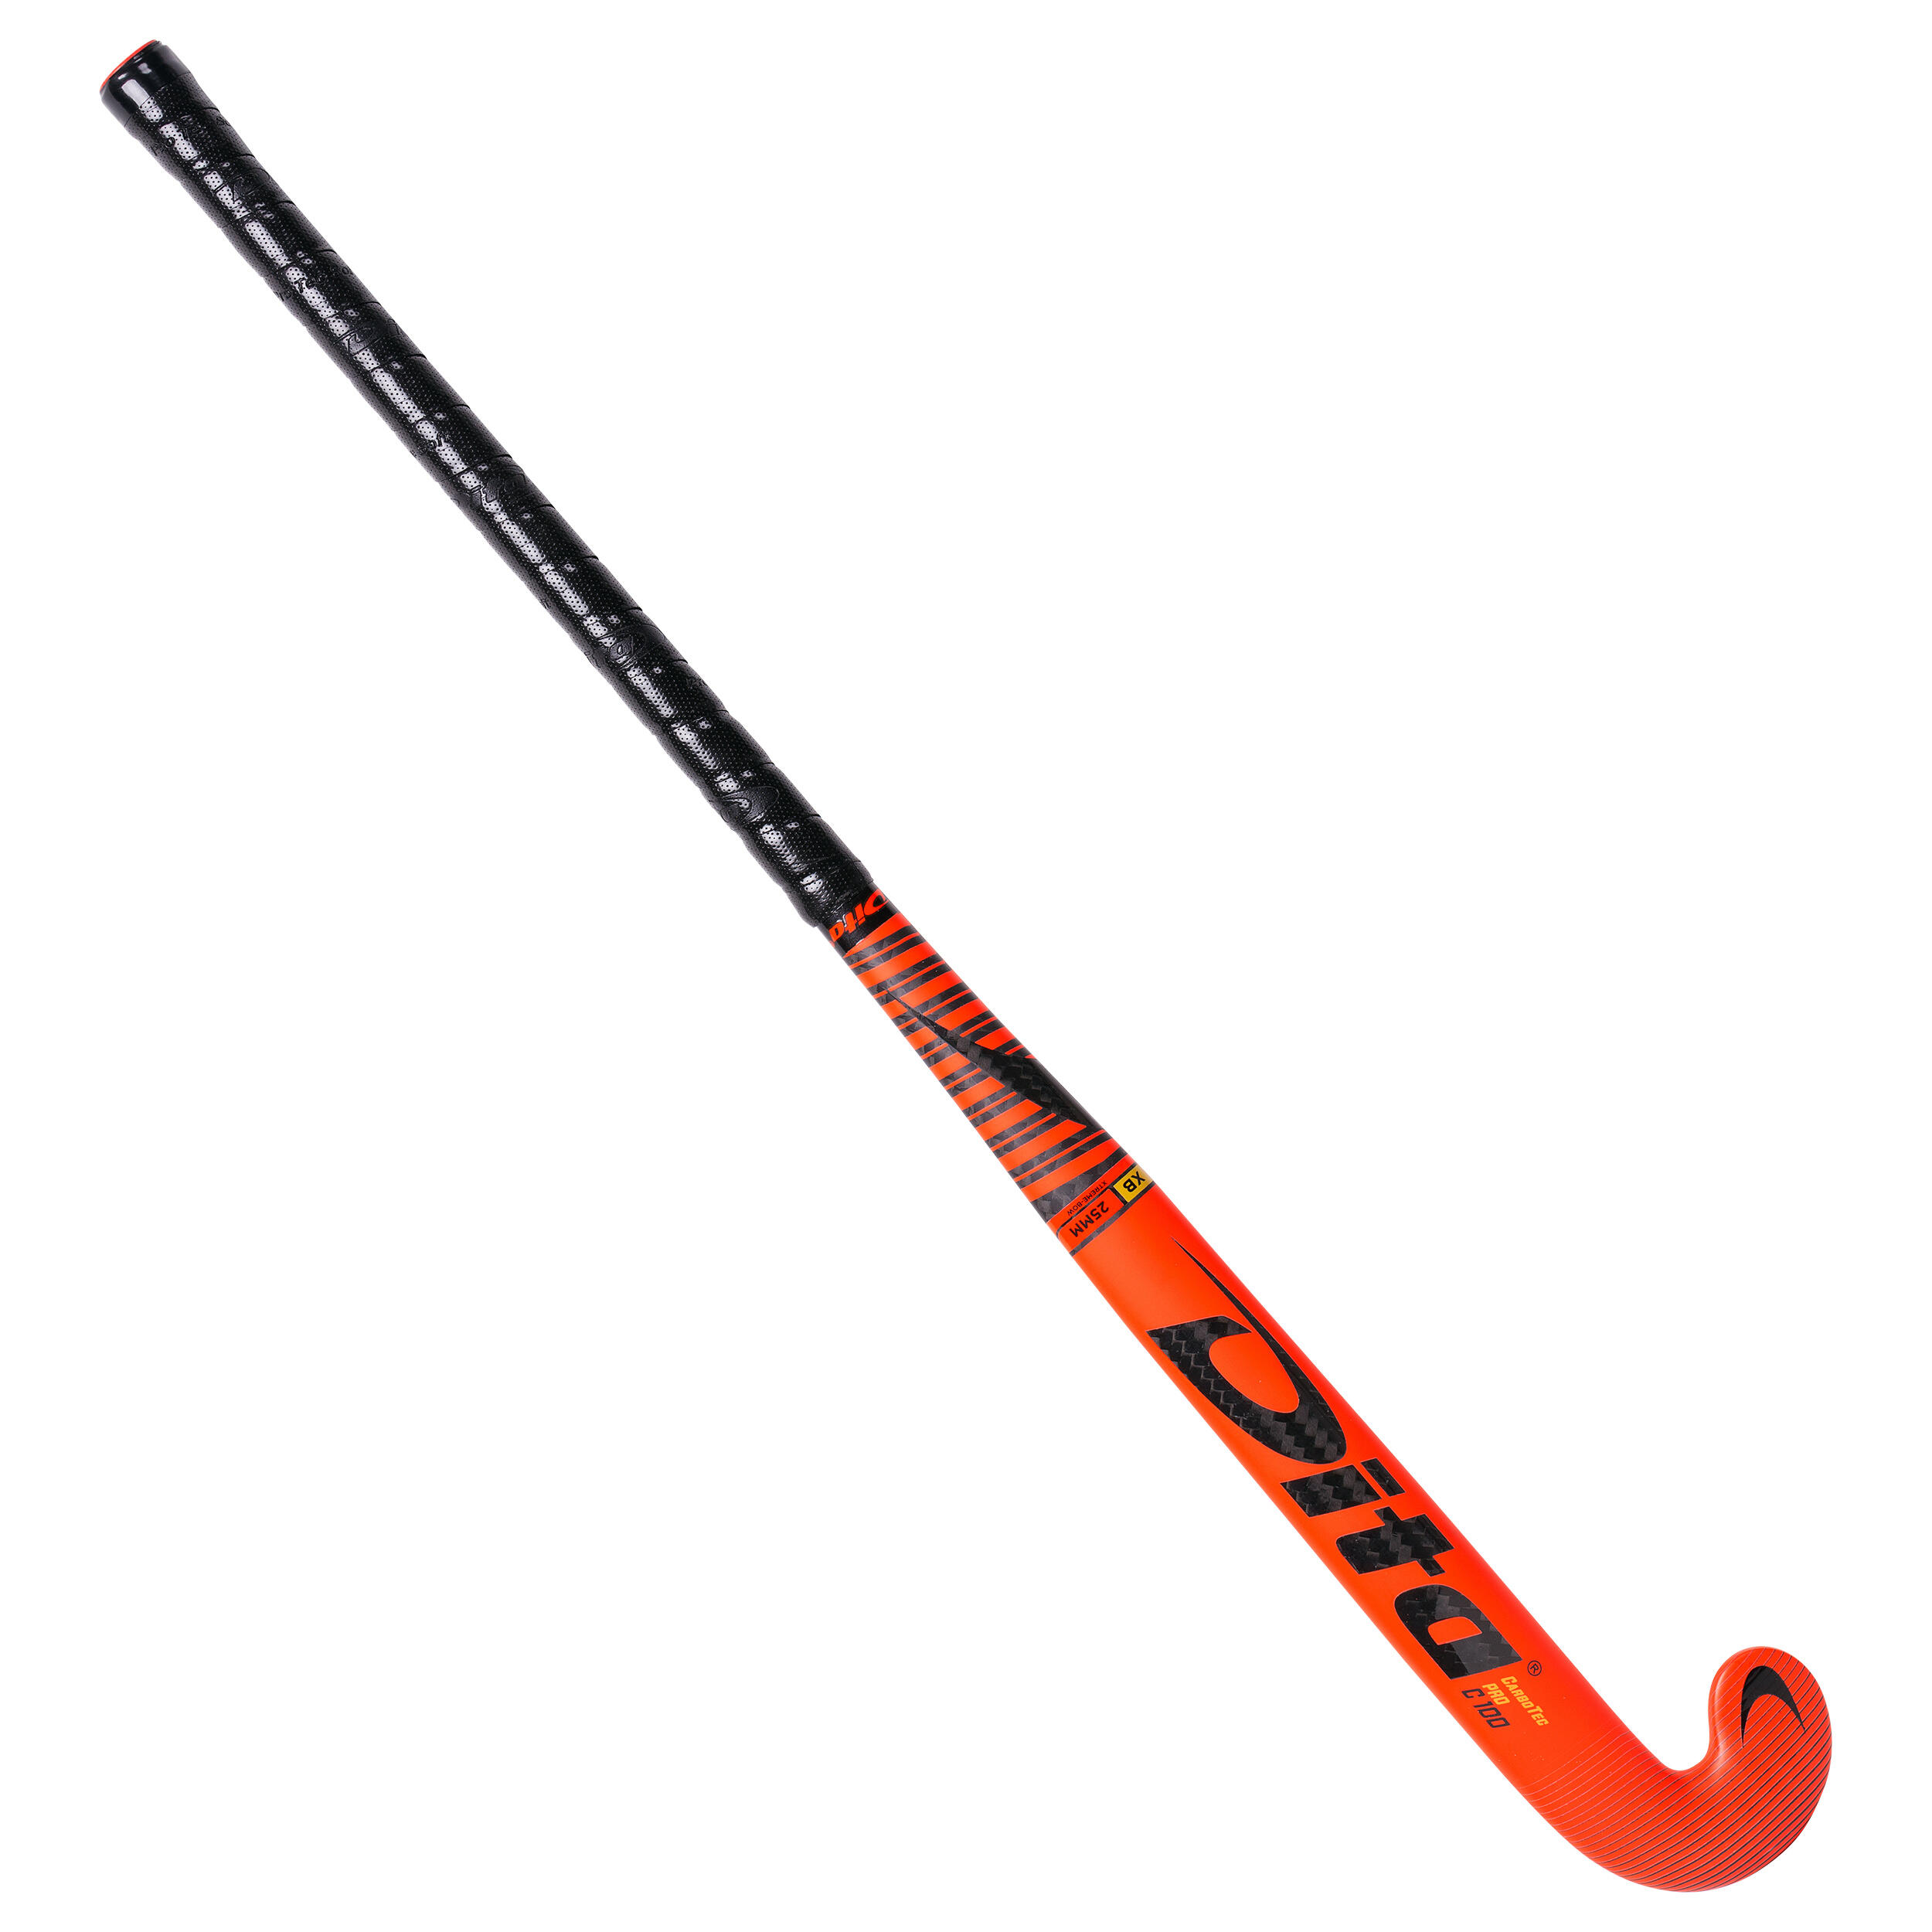 DITA Adult Advanced Indoor Hockey Stick XLB 100% Carbon CarboTecPro - Red/Black